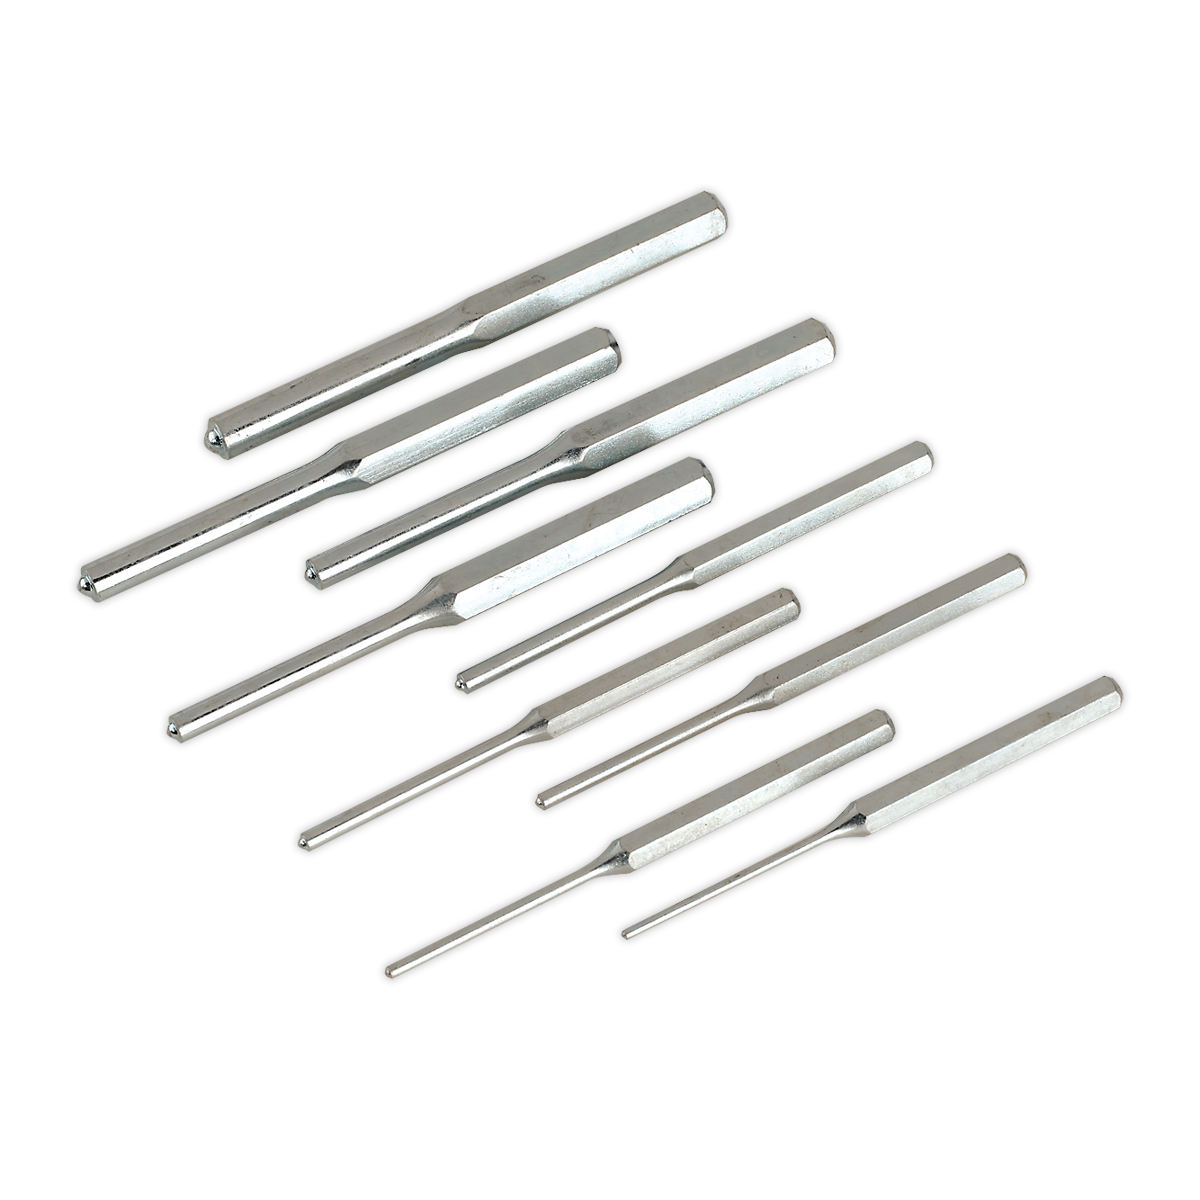 Roll Pin Punch Set 9pc 1/8-1/2" - Imperial - AK9109 - Farming Parts